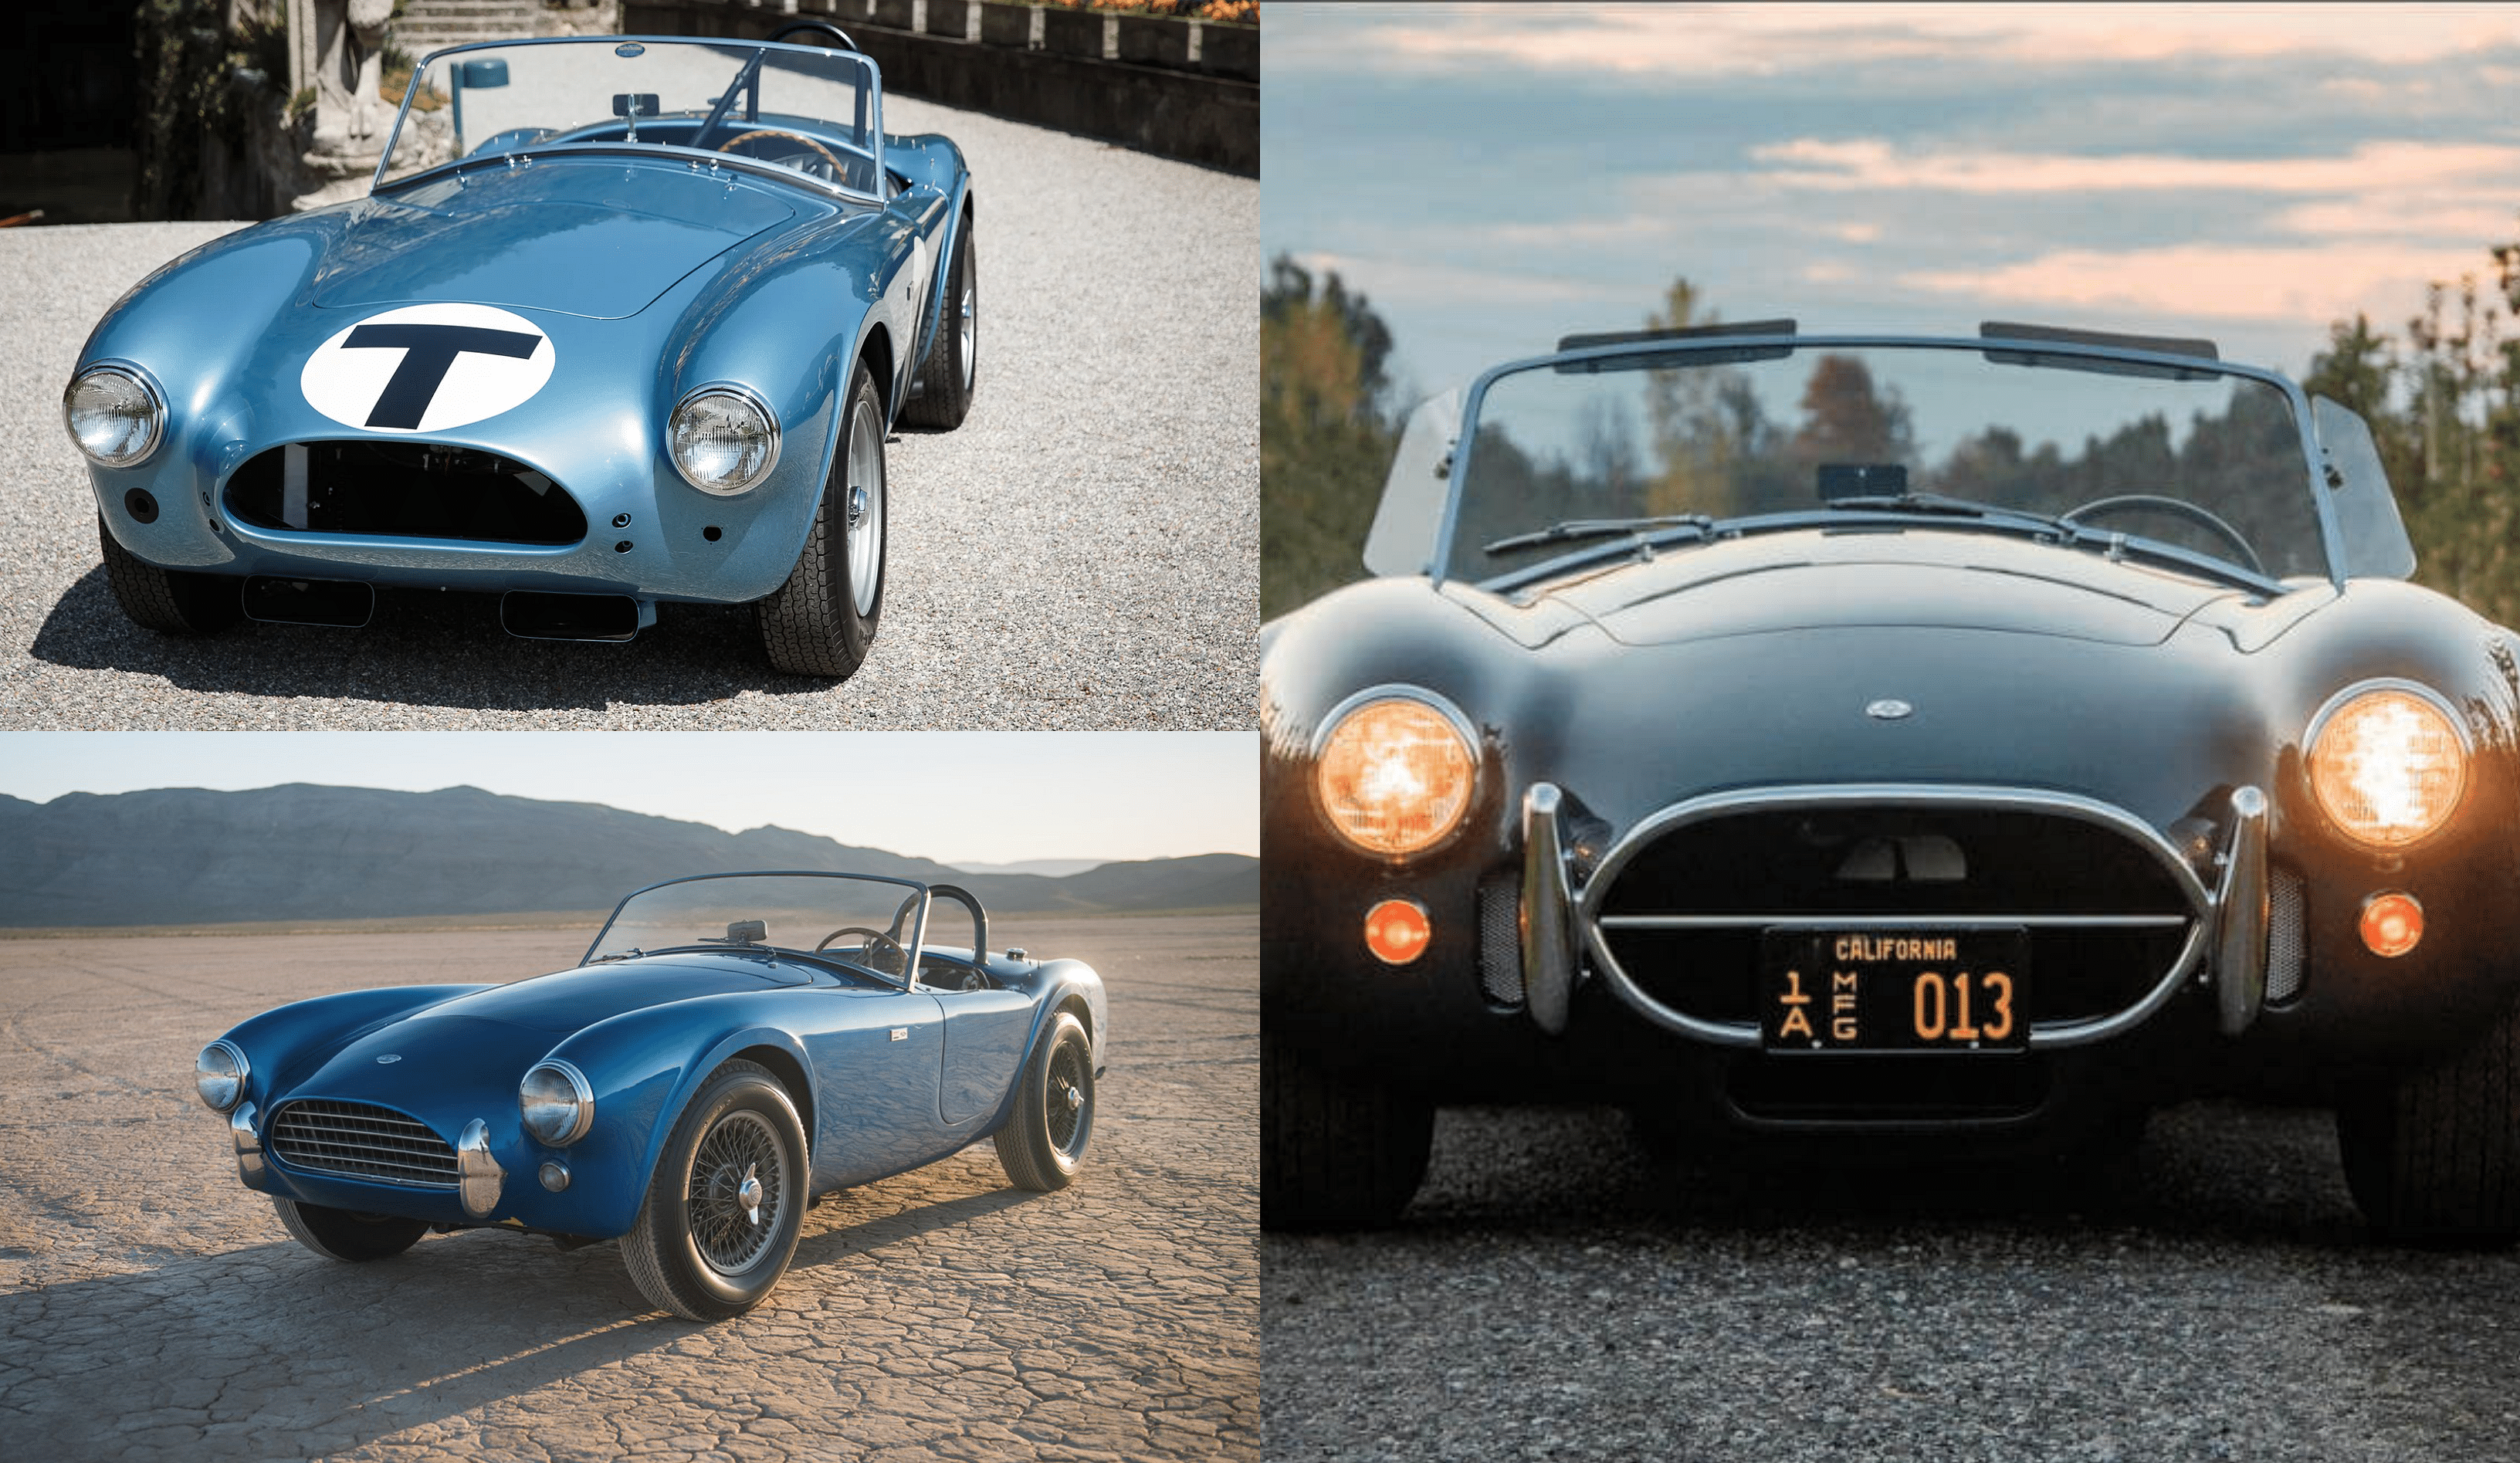 AC Cobra in black and blue color, front view